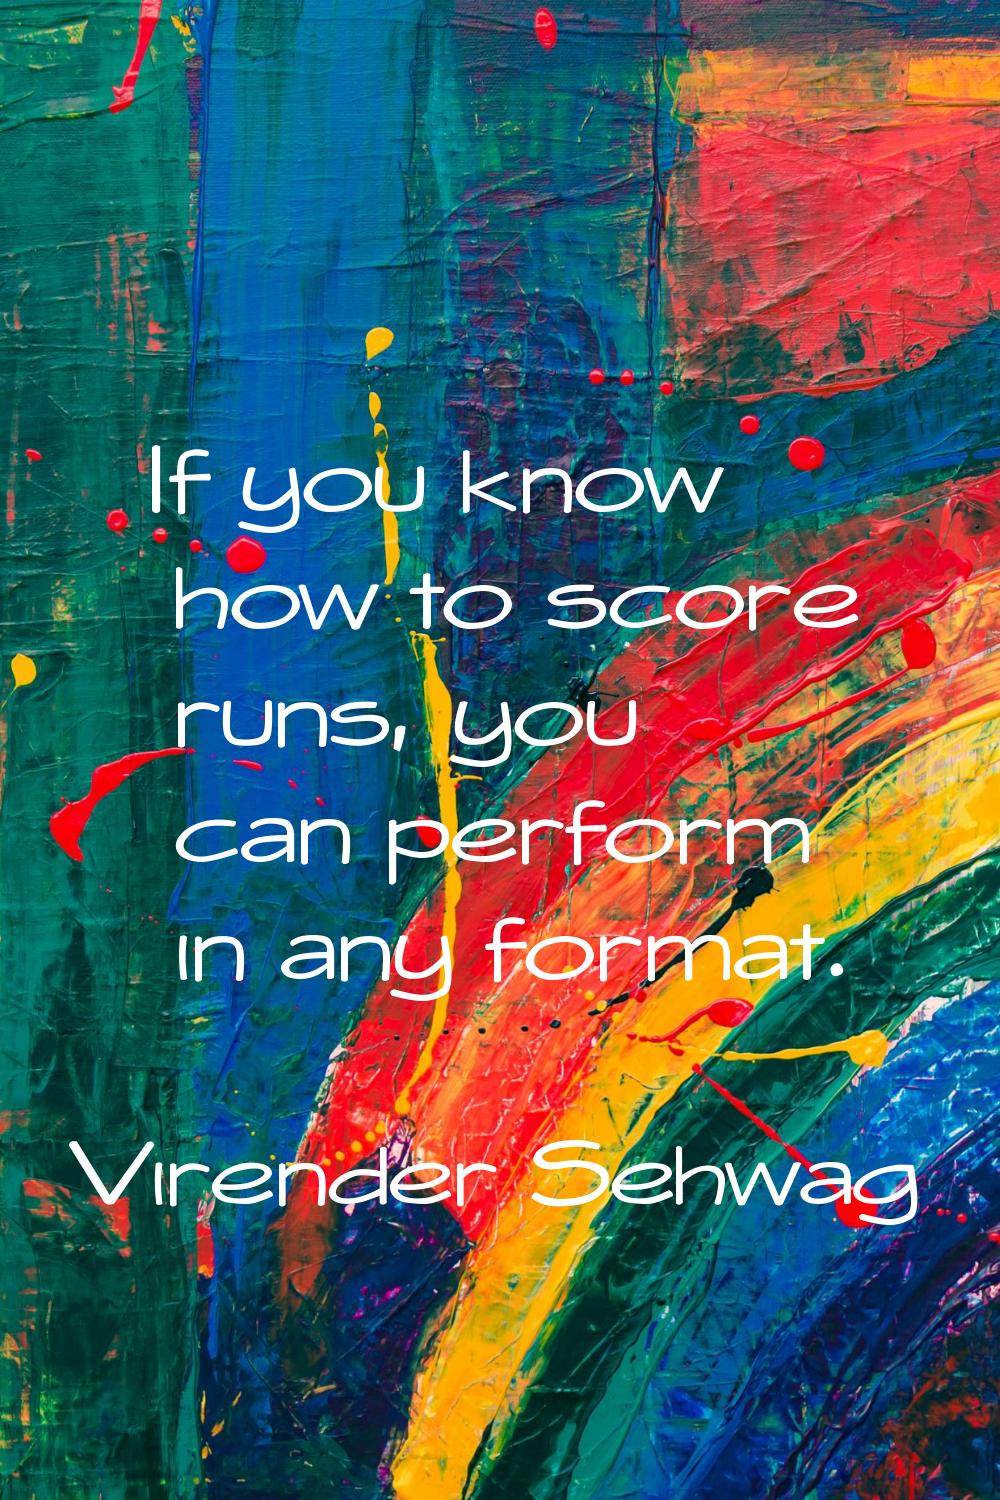 If you know how to score runs, you can perform in any format.